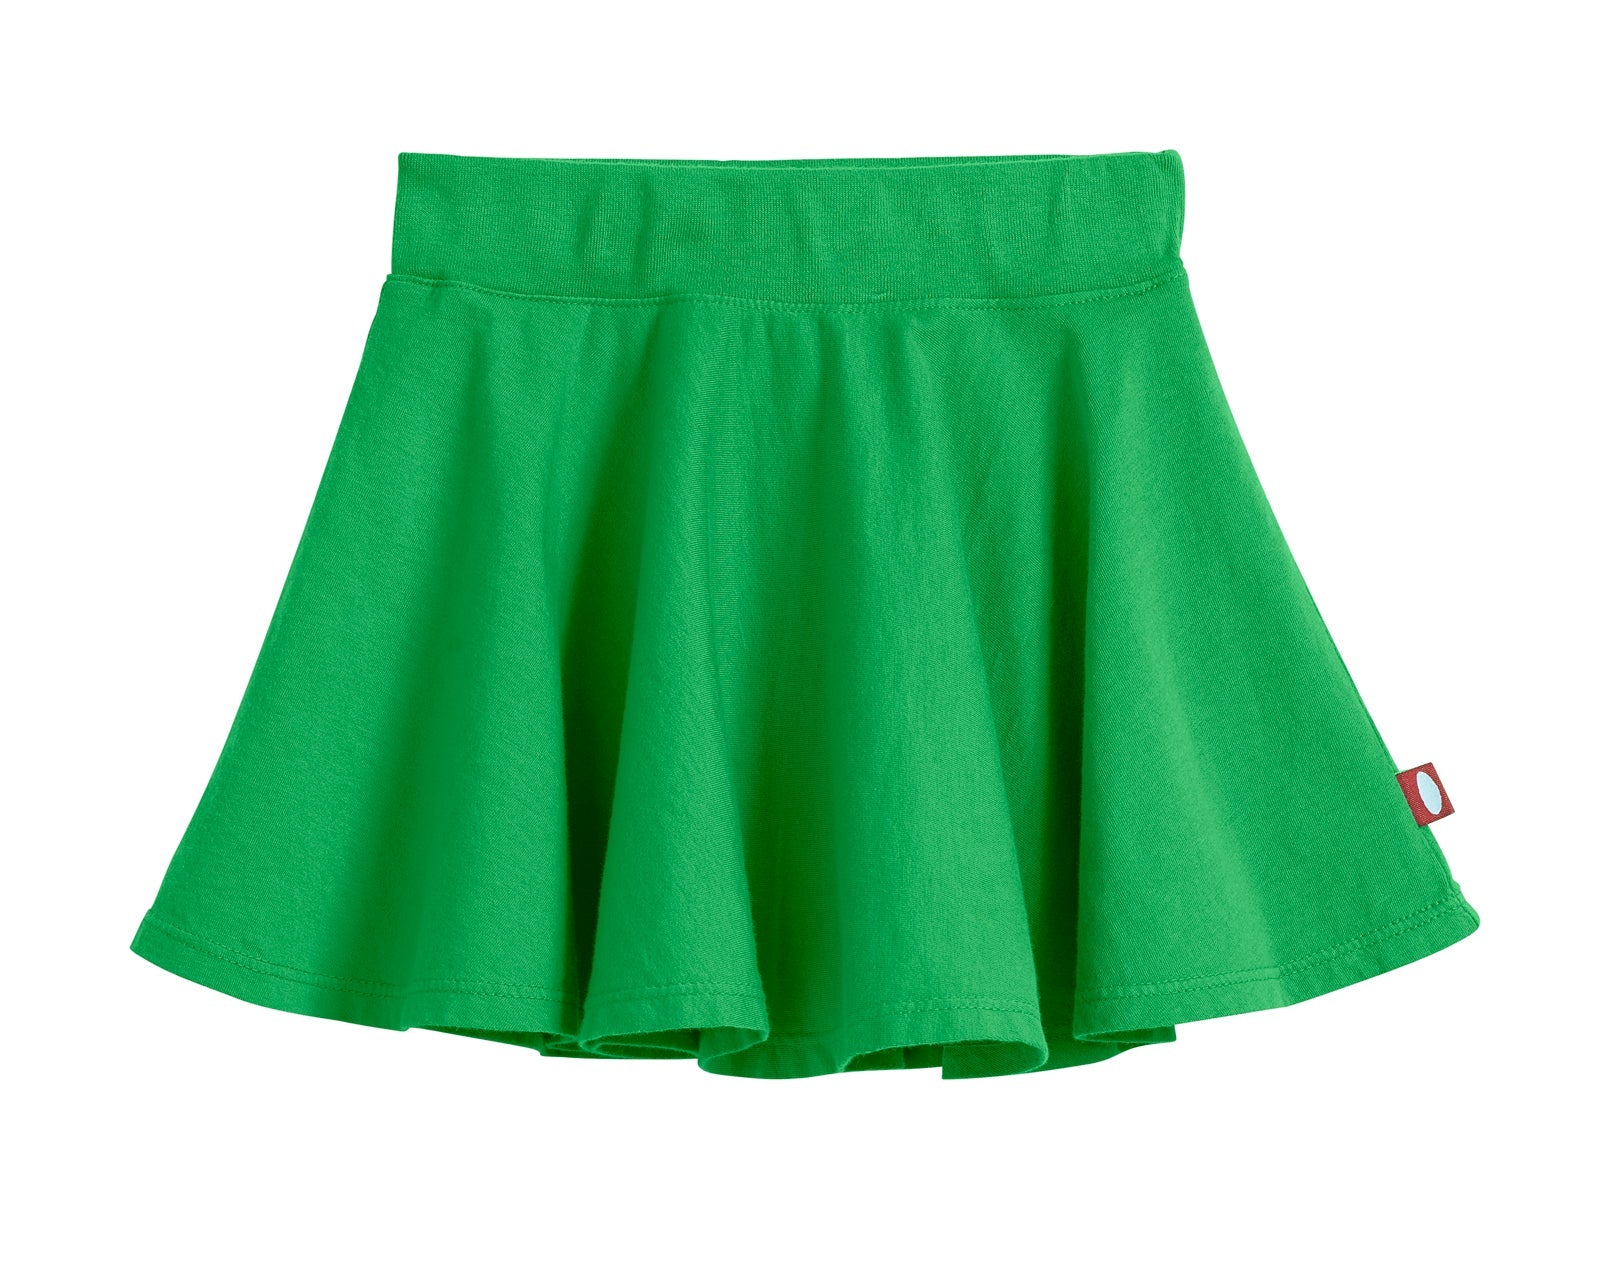 Cute Shorts & Skirts For Girls, Ages 8-12